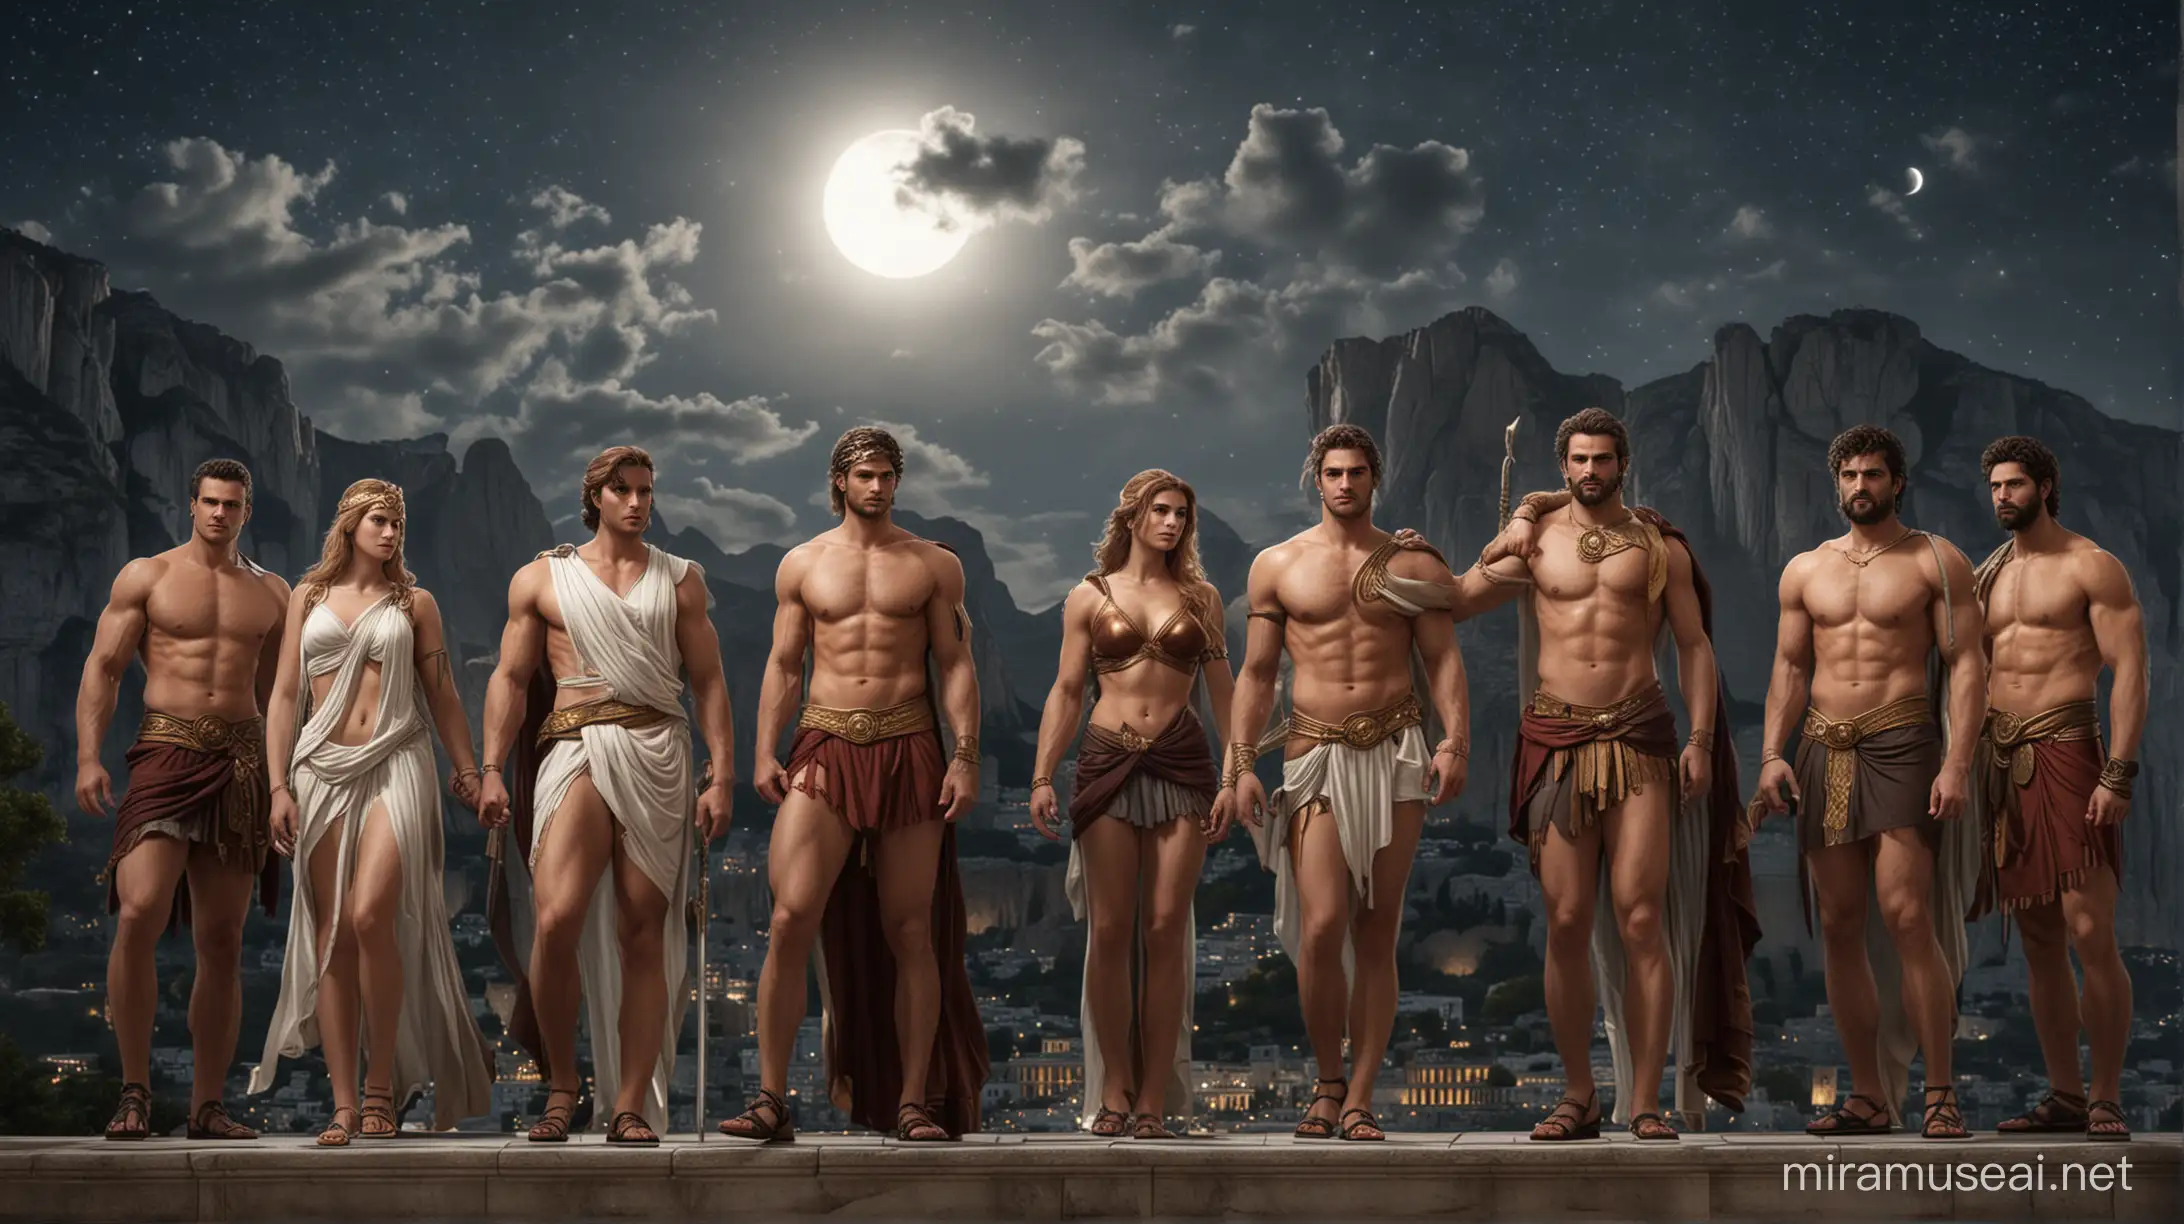 Generate picture of  greek gods , standing in a circuilar manner infront of palace situated on mount olympus , with moon lit sky and dark themed background. The 12 greek gods  and godess are Zeus[male] , Hera[female] , Poseidon[male] , Demeter[female], Athena[female] , Artemis[female], Apollo[male], Hephastus[male], Aphrodite[female],Ares[male],Hermes[male] and Dionysus[male]. keep different body picture of all characters.